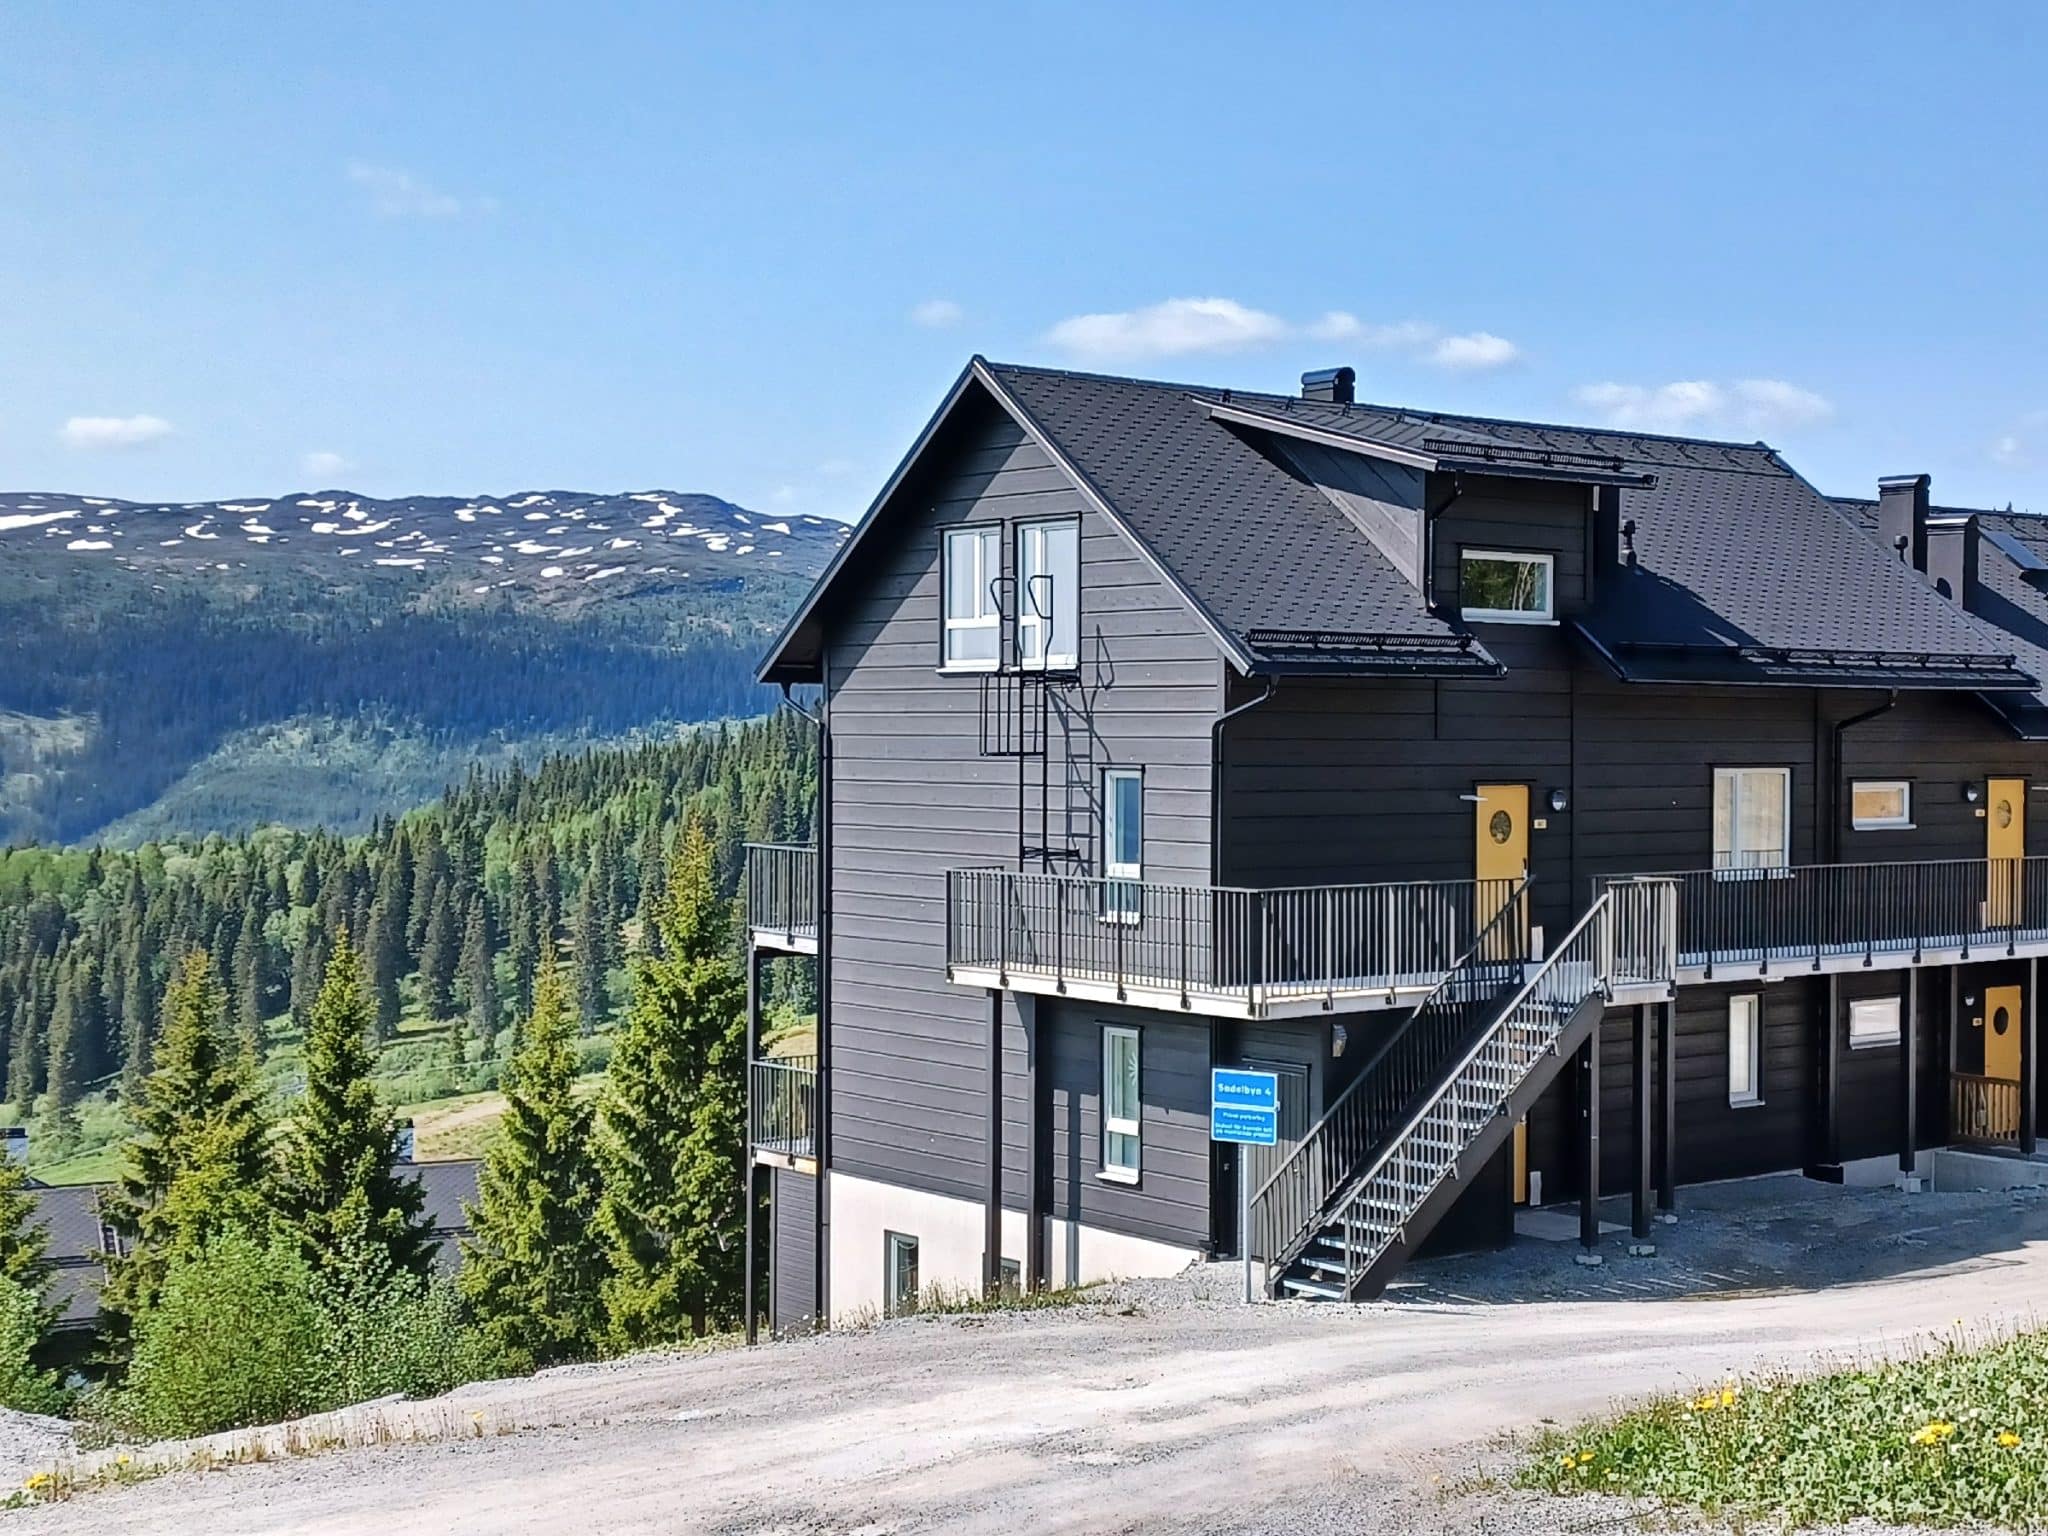 Brown semi-detached property with yellow doors, dormer with windows, external staircase and balcony along the entire facade. In the background a fantastic view of a mountain landscape with patches of snow on top. spruce forest and a blue summer sky.